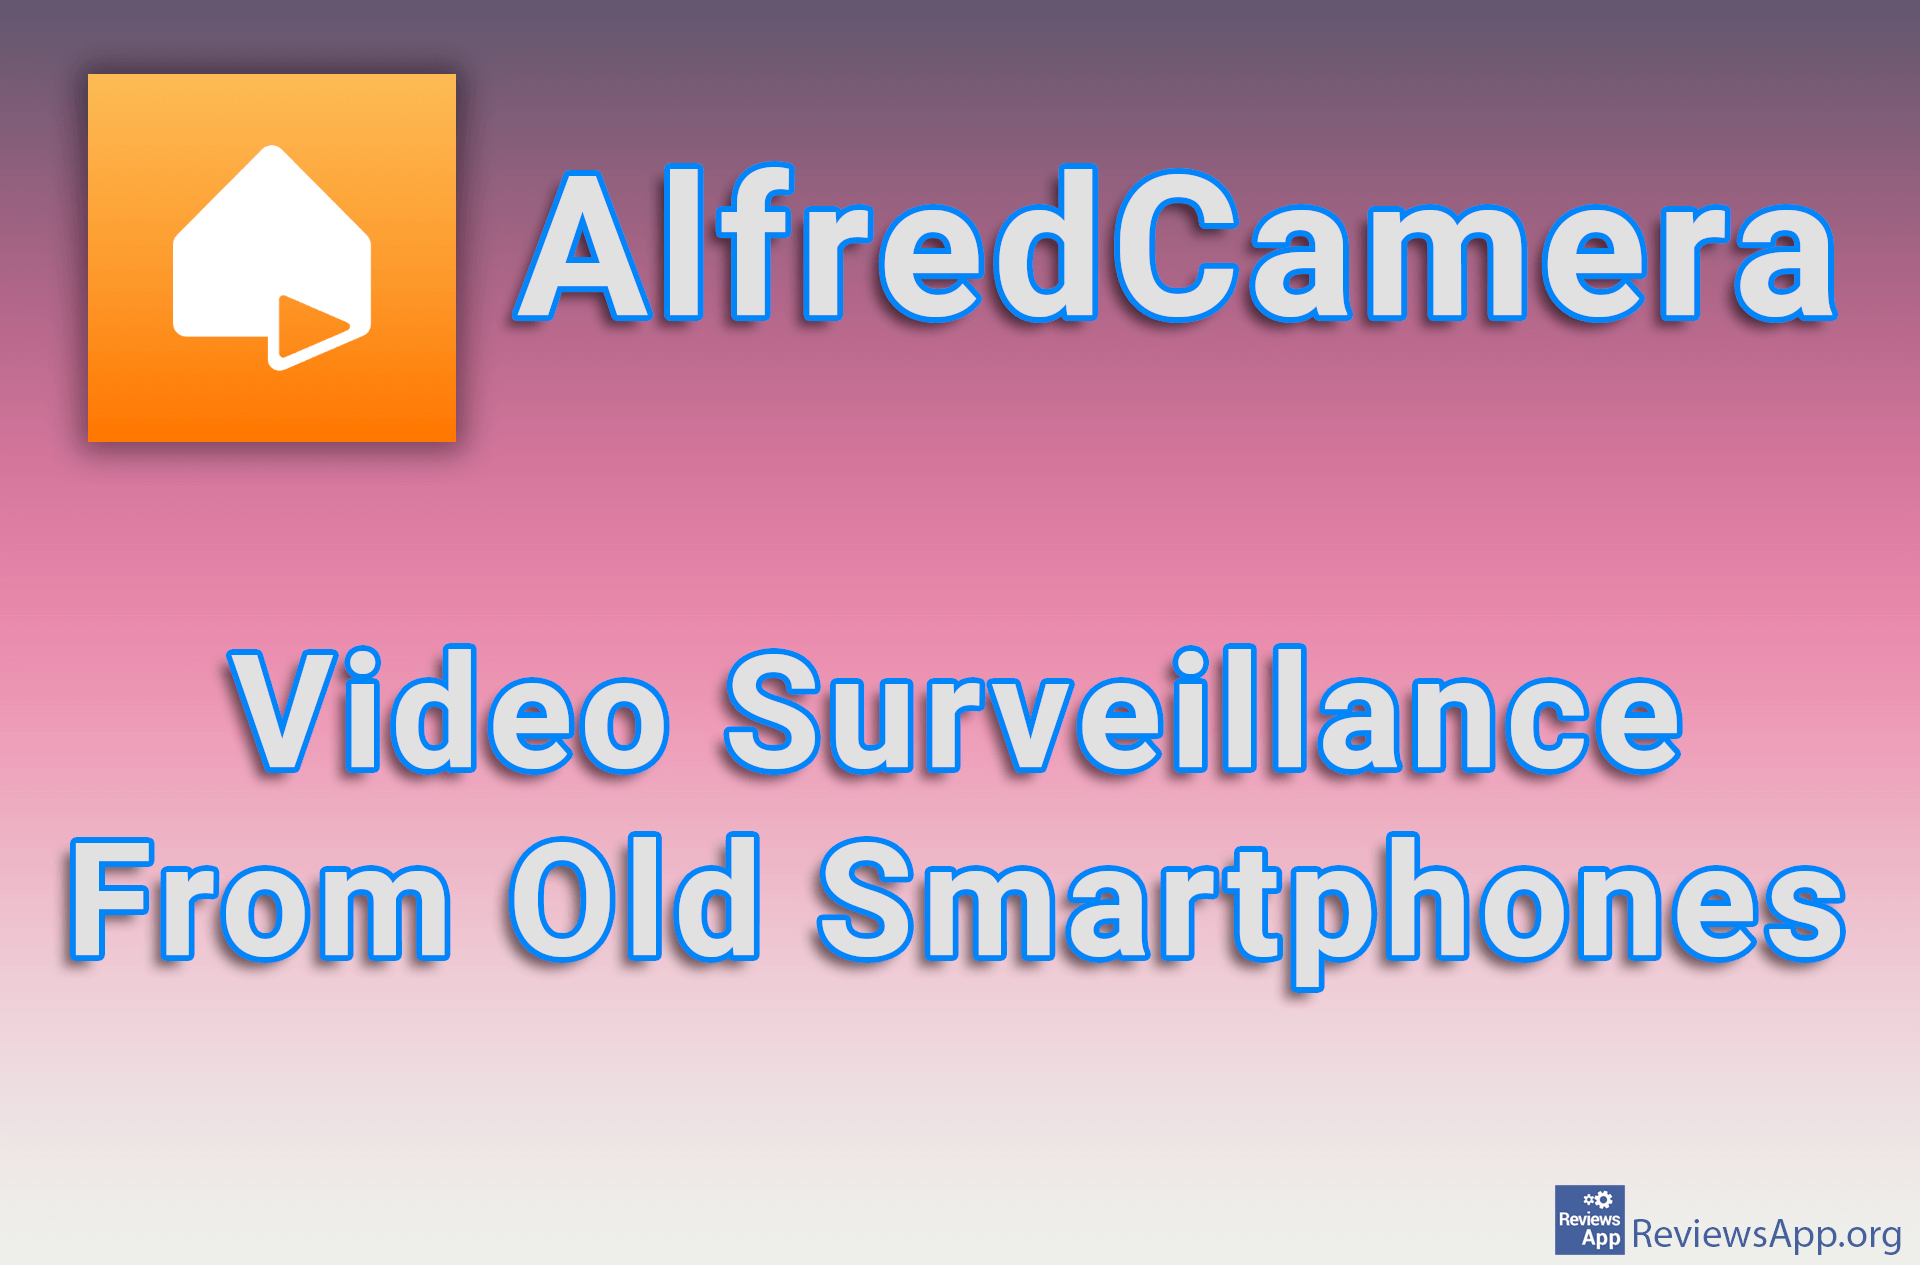 AlfredCamera – Video Surveillance From Old Smartphones